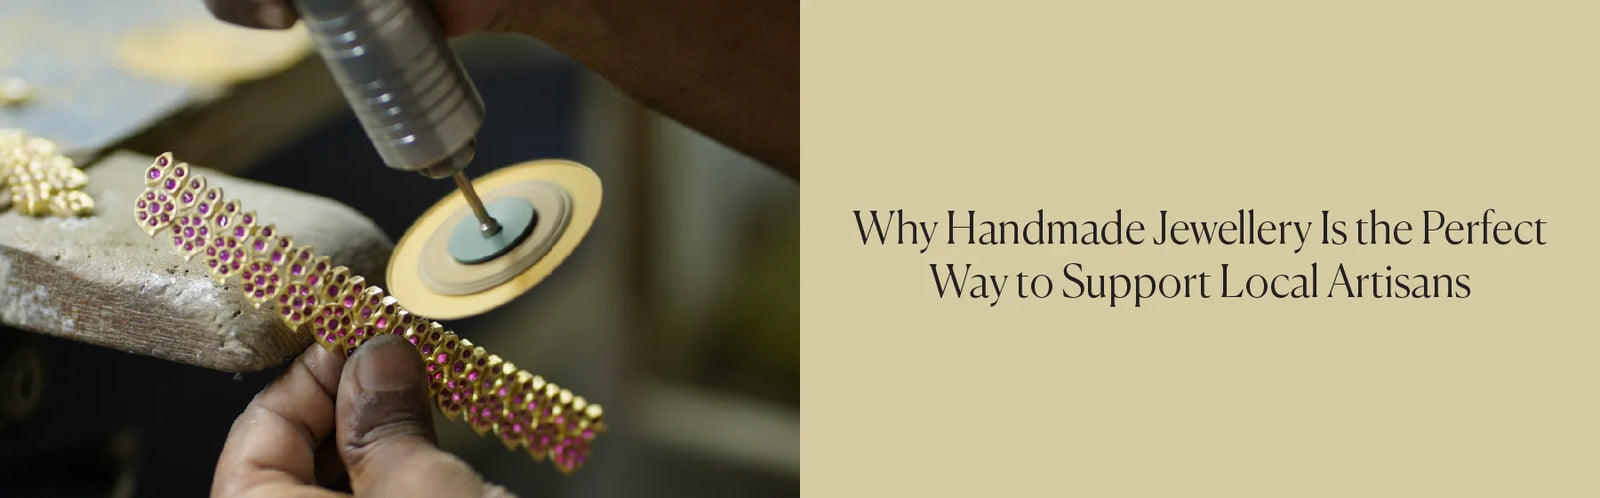 Why Handmade Jewellery Is the Perfect Way to Support Local Artisans